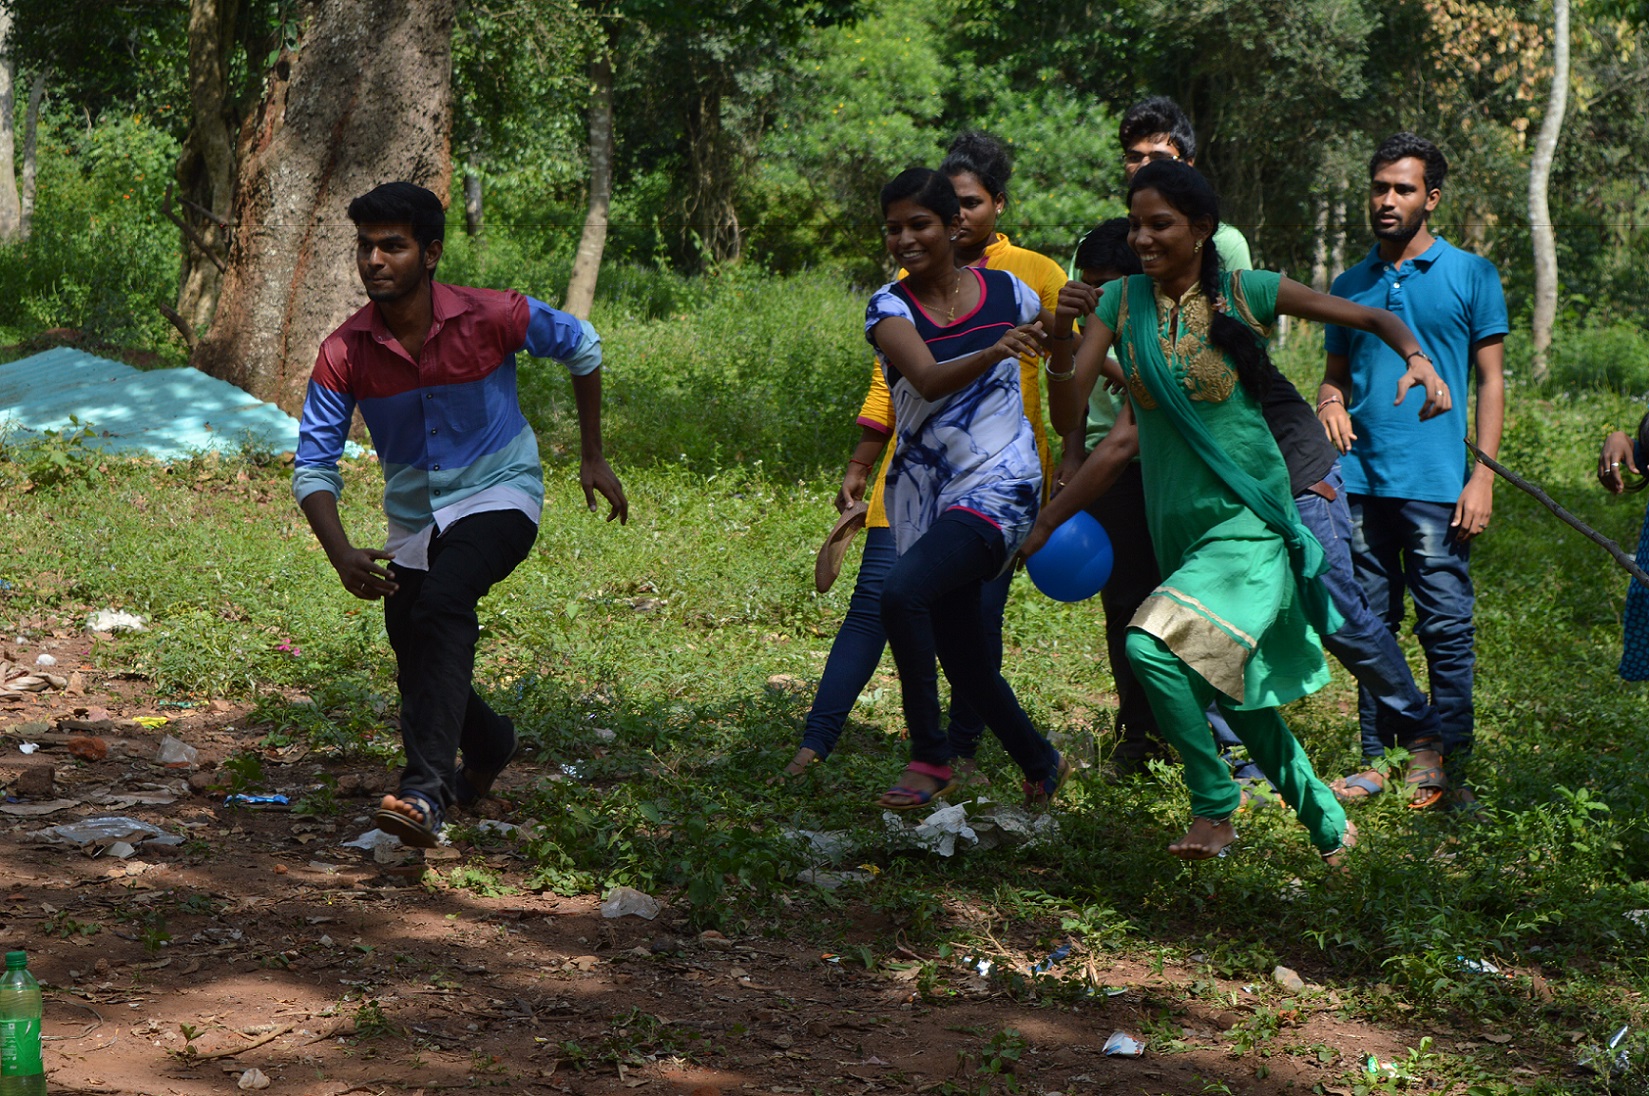 “Leadership through Play” – Outbound Activity and Welcome Party